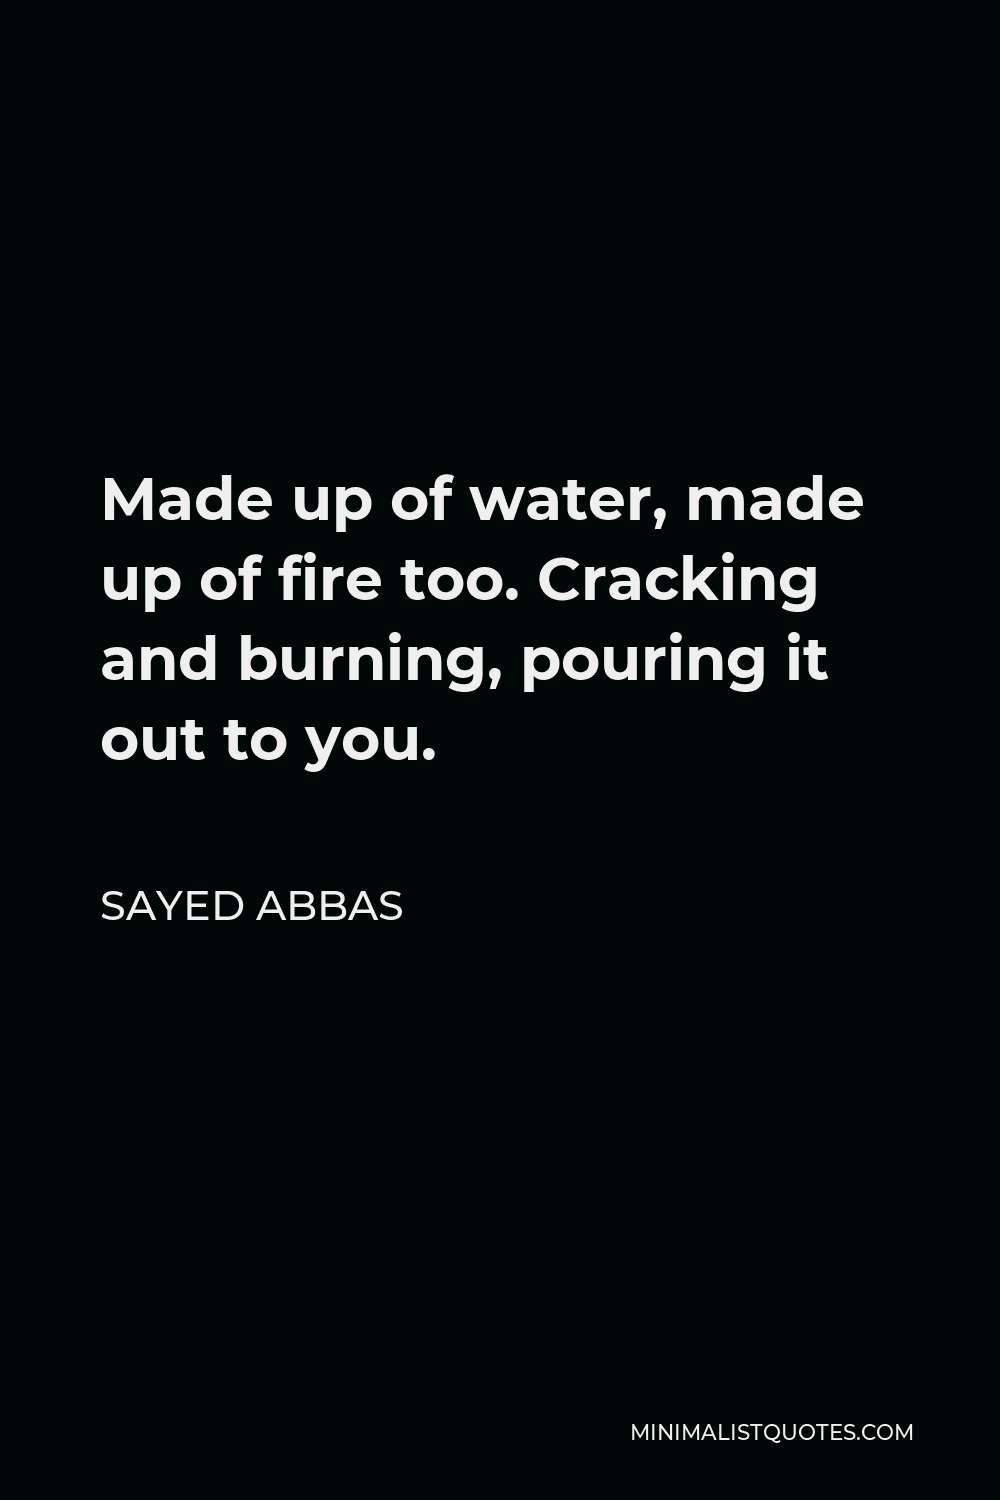 Sayed Abbas Quote - Made up of water, made up of fire too. Cracking and burning, pouring it out to you.